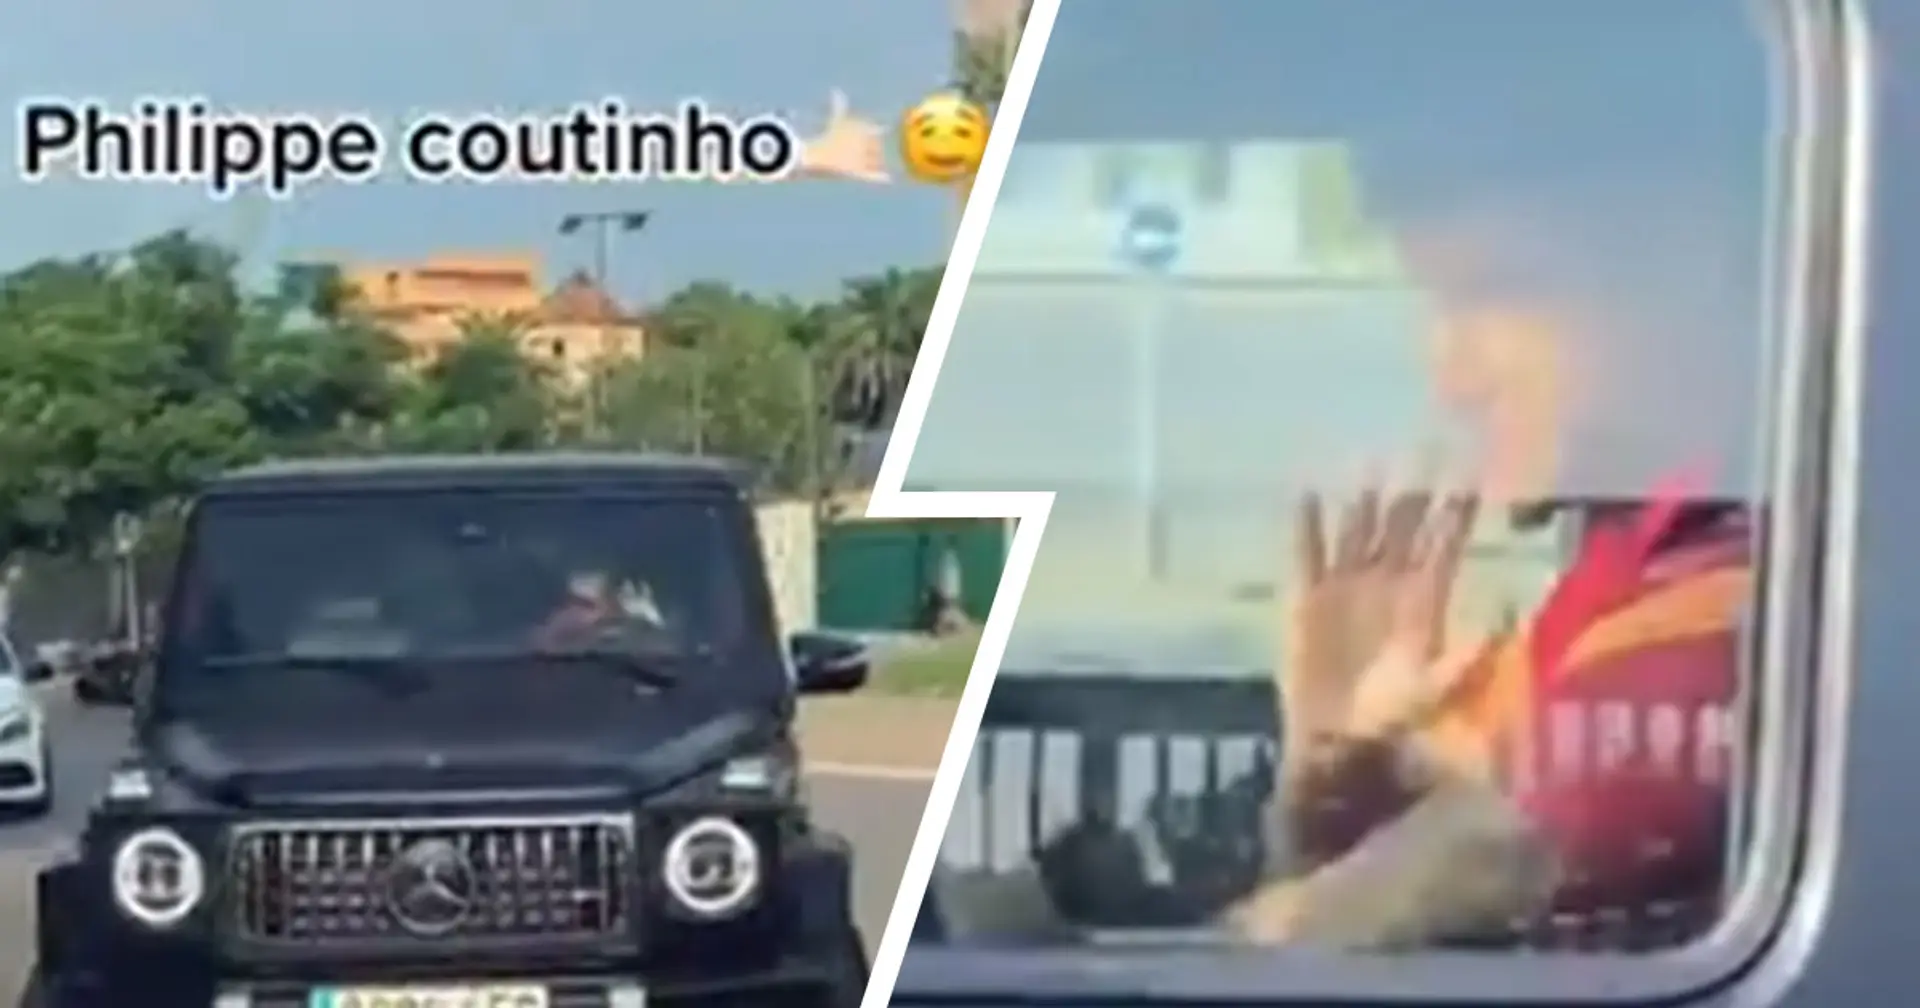 Phil Coutinho's license plate reveals he's still a big Liverpool fan